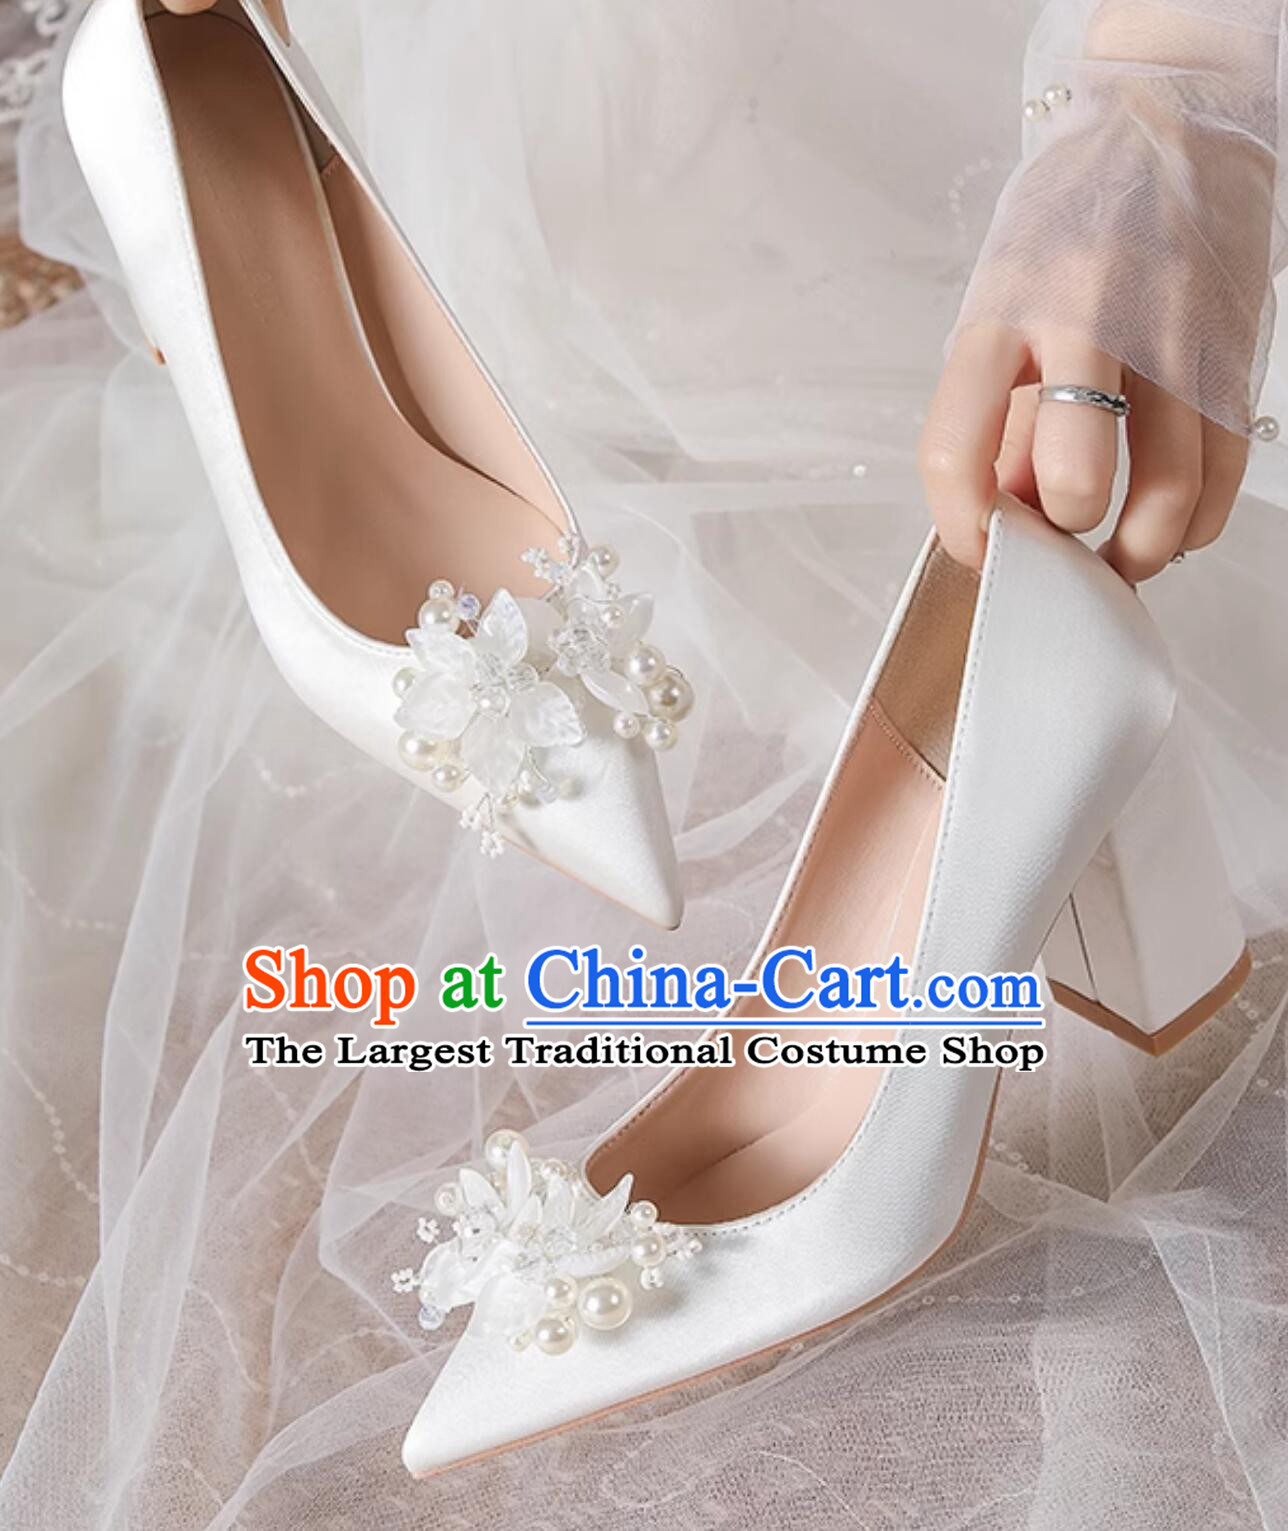 Top 5cm Heeled Shoes Bride Shoes White Wedding Shoes French Fashion Shoes